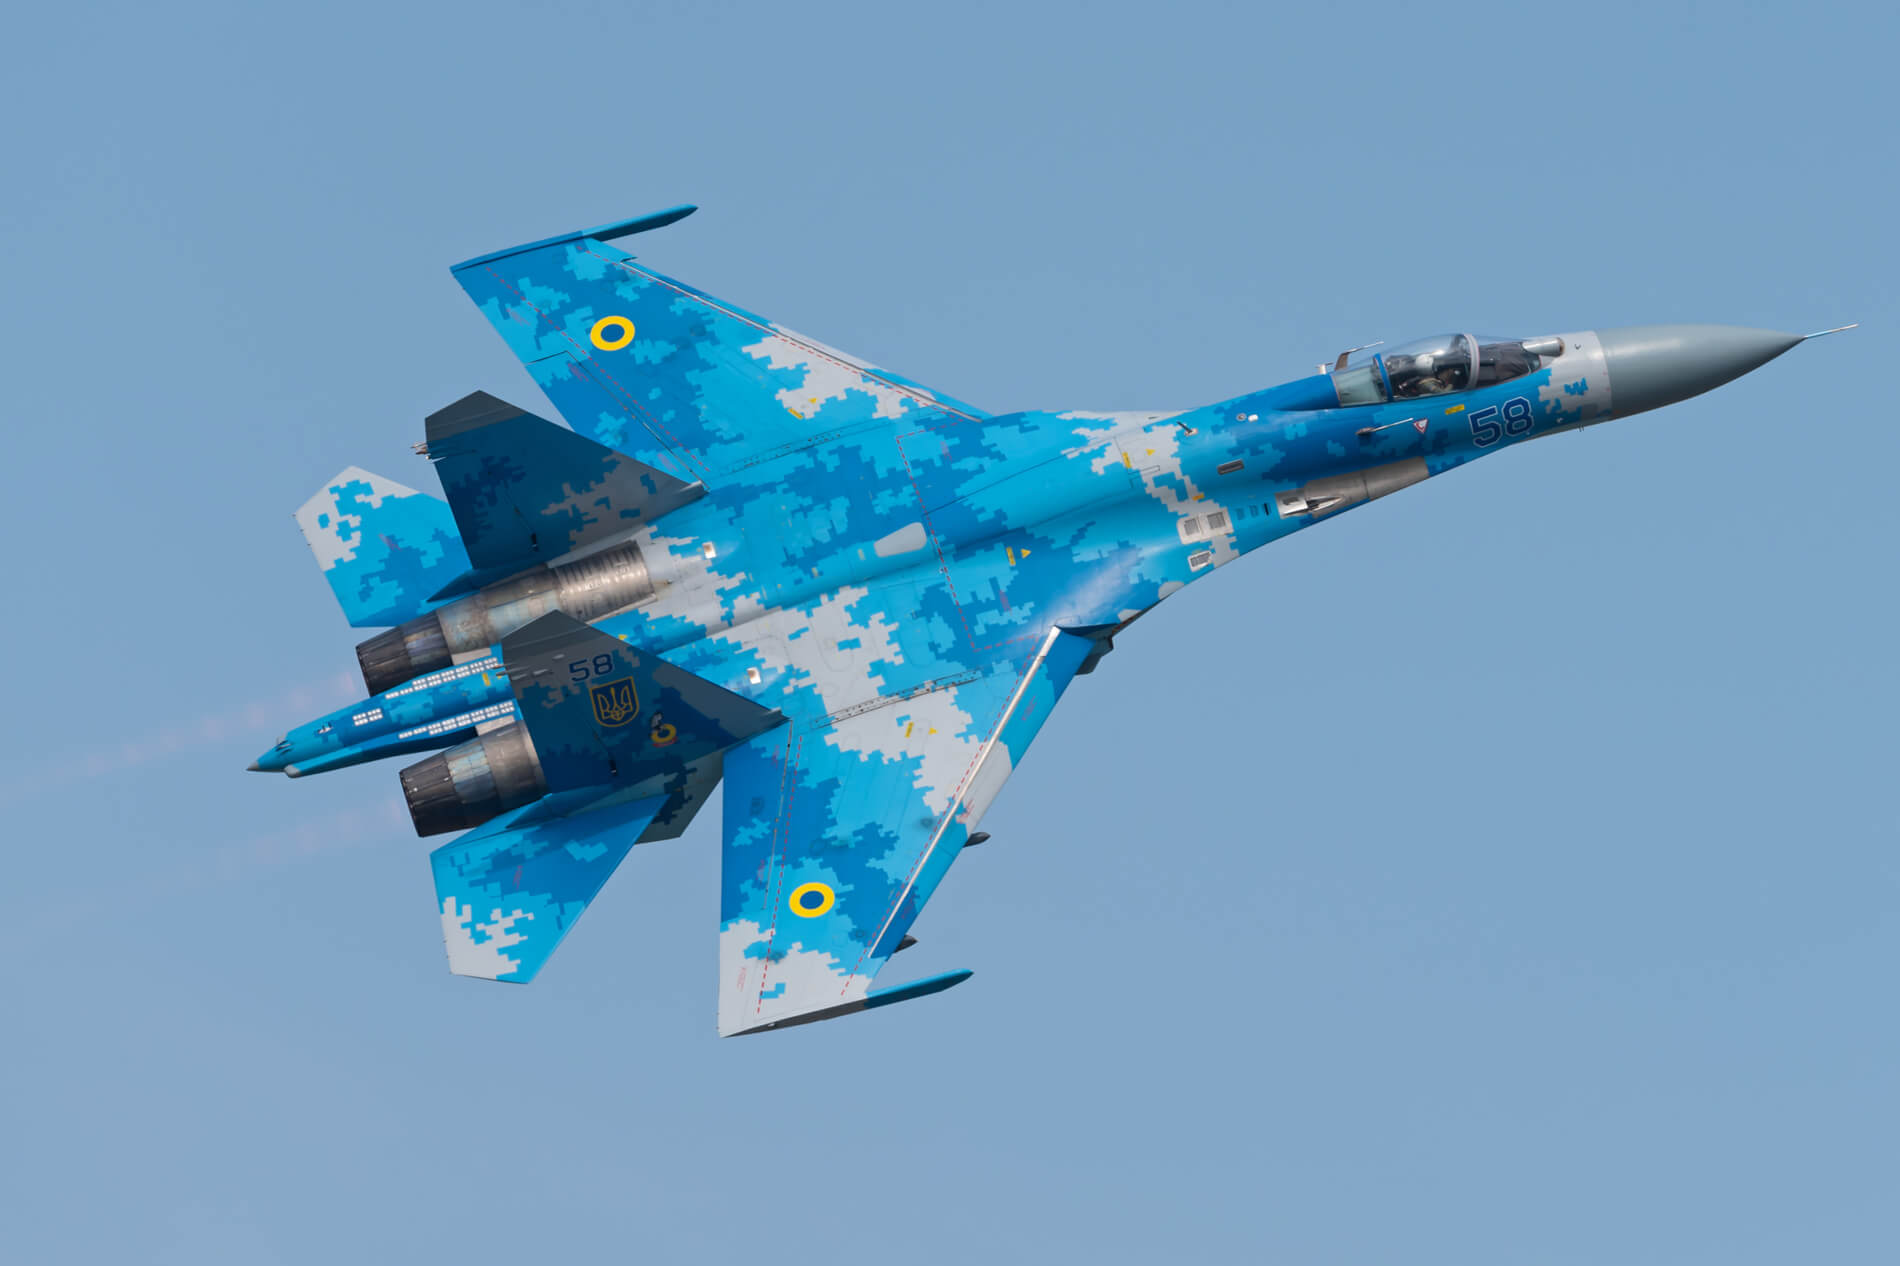  Sukhoi Su-27 Flanker - Fastest Plane in the World (Top Speed)